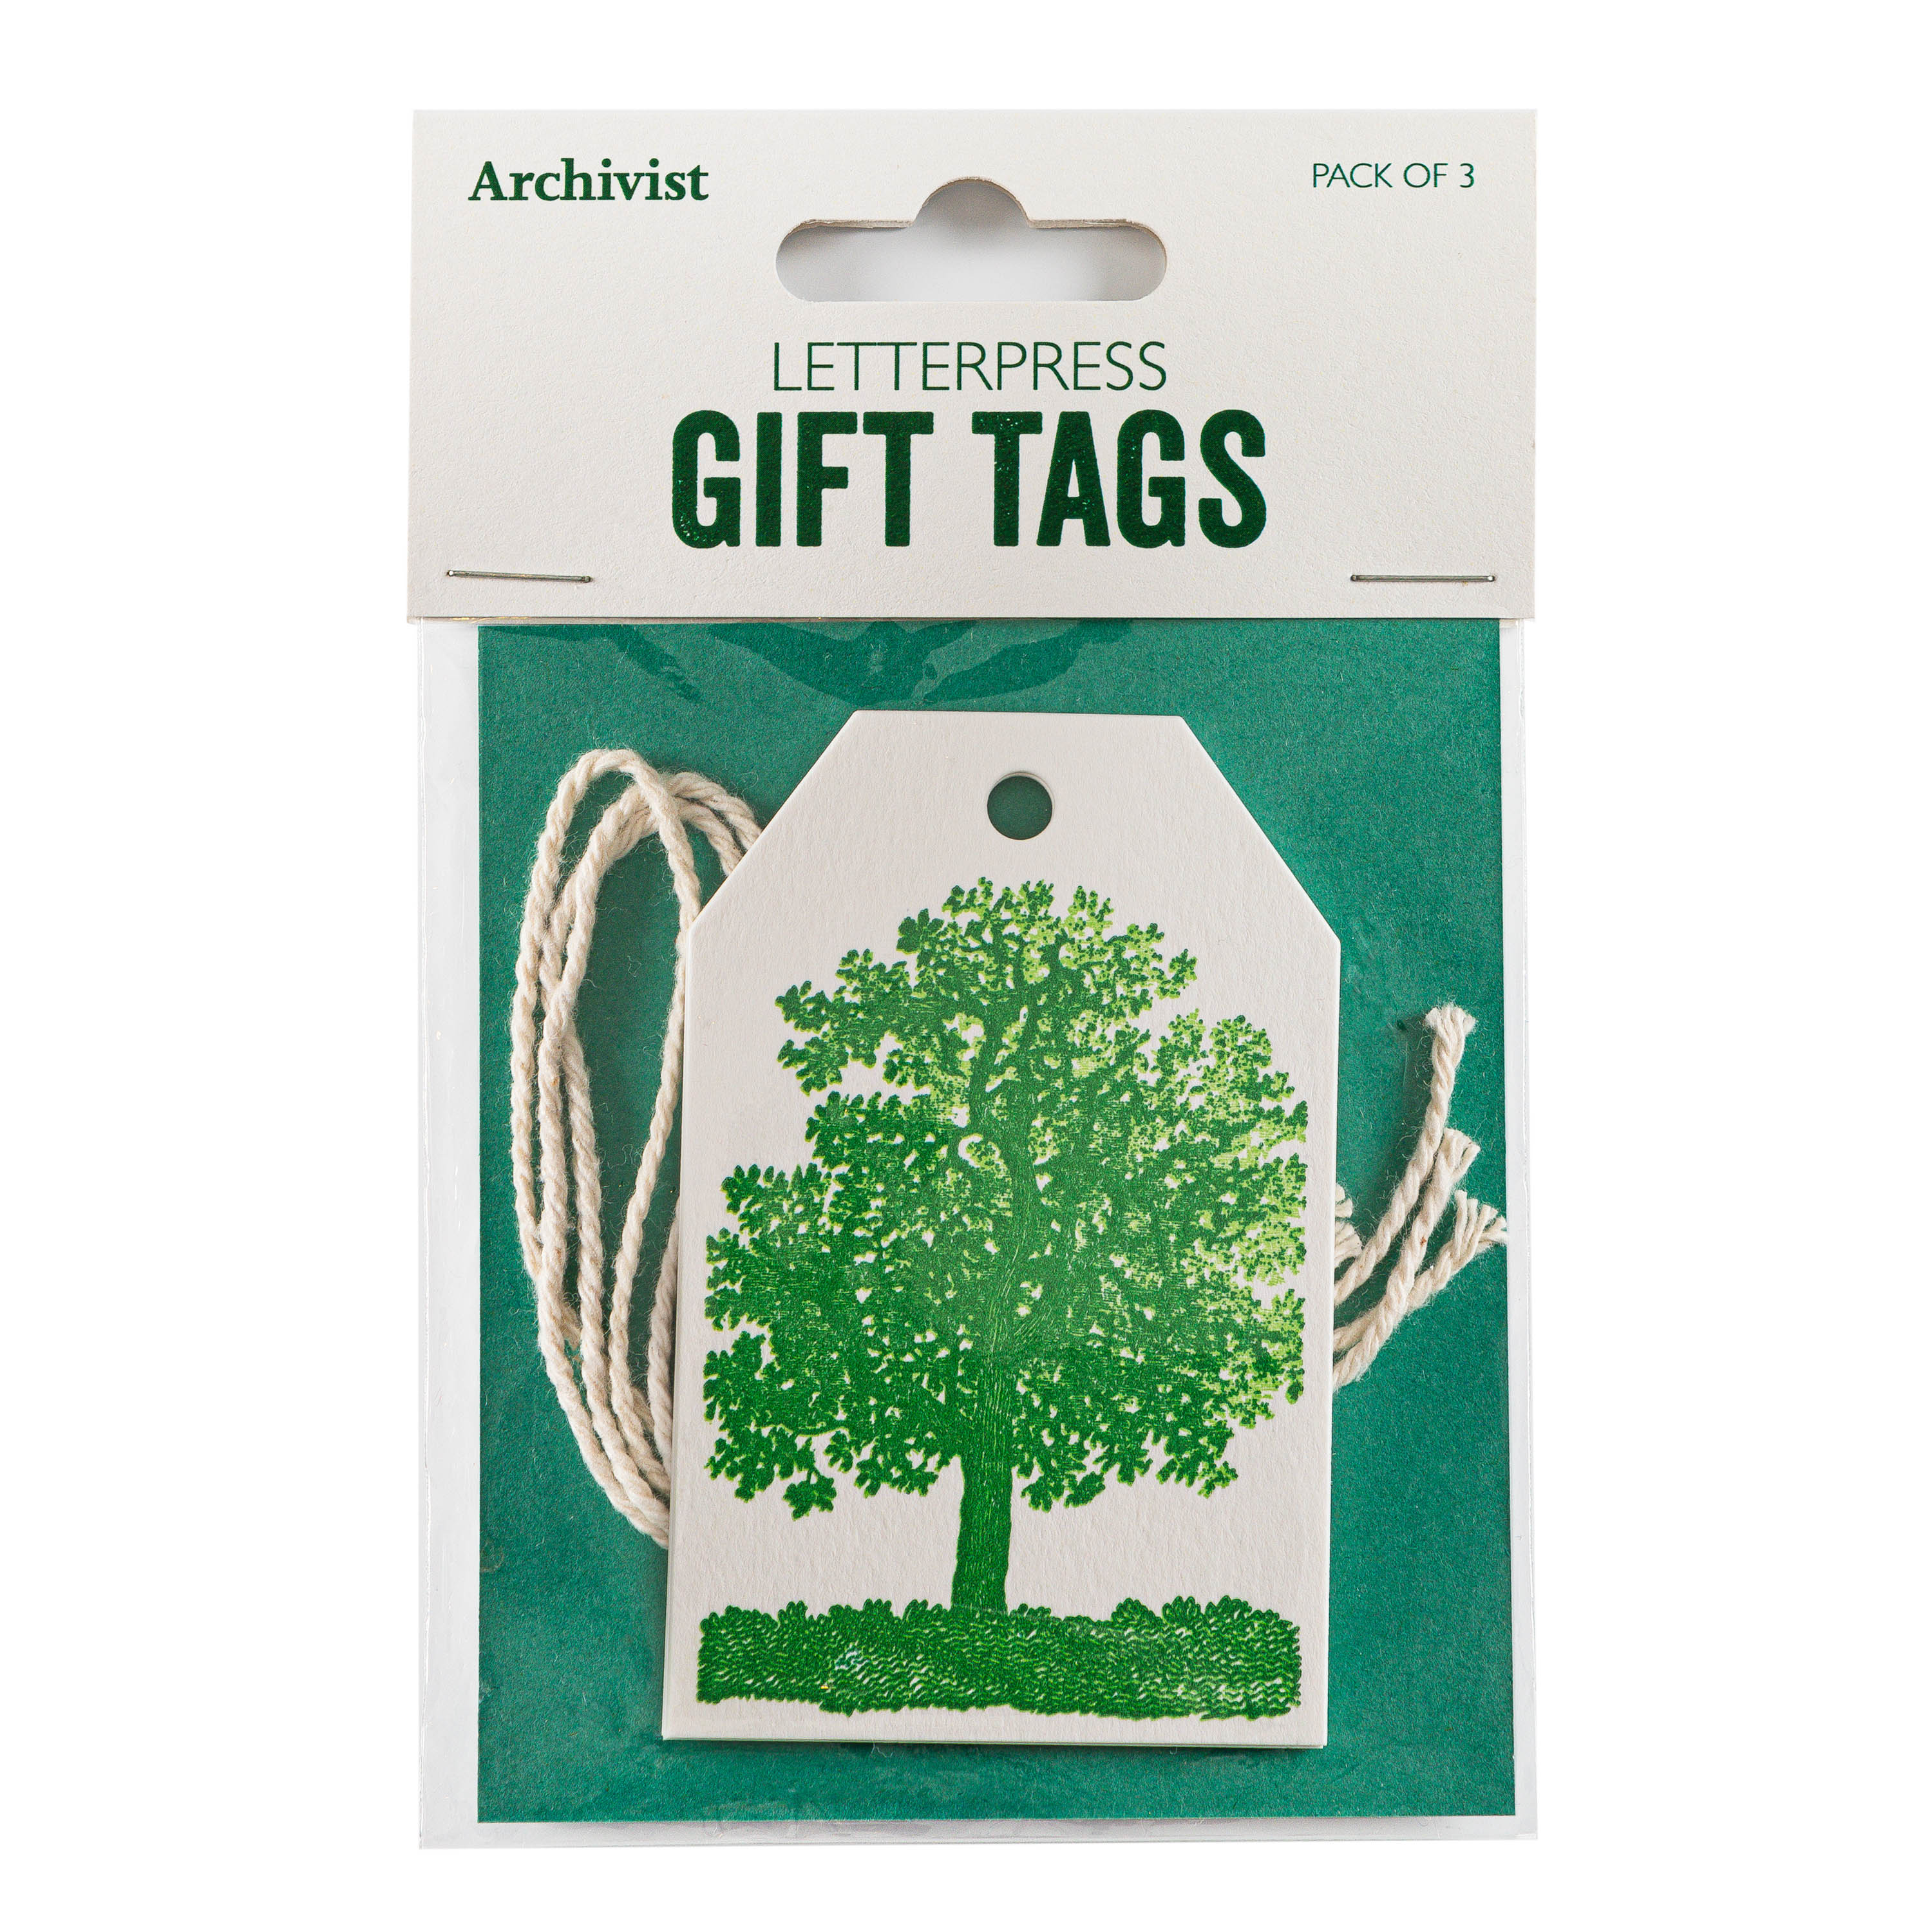 Oak Tree - Gift tags - Archivist - from Archivist Gallery 